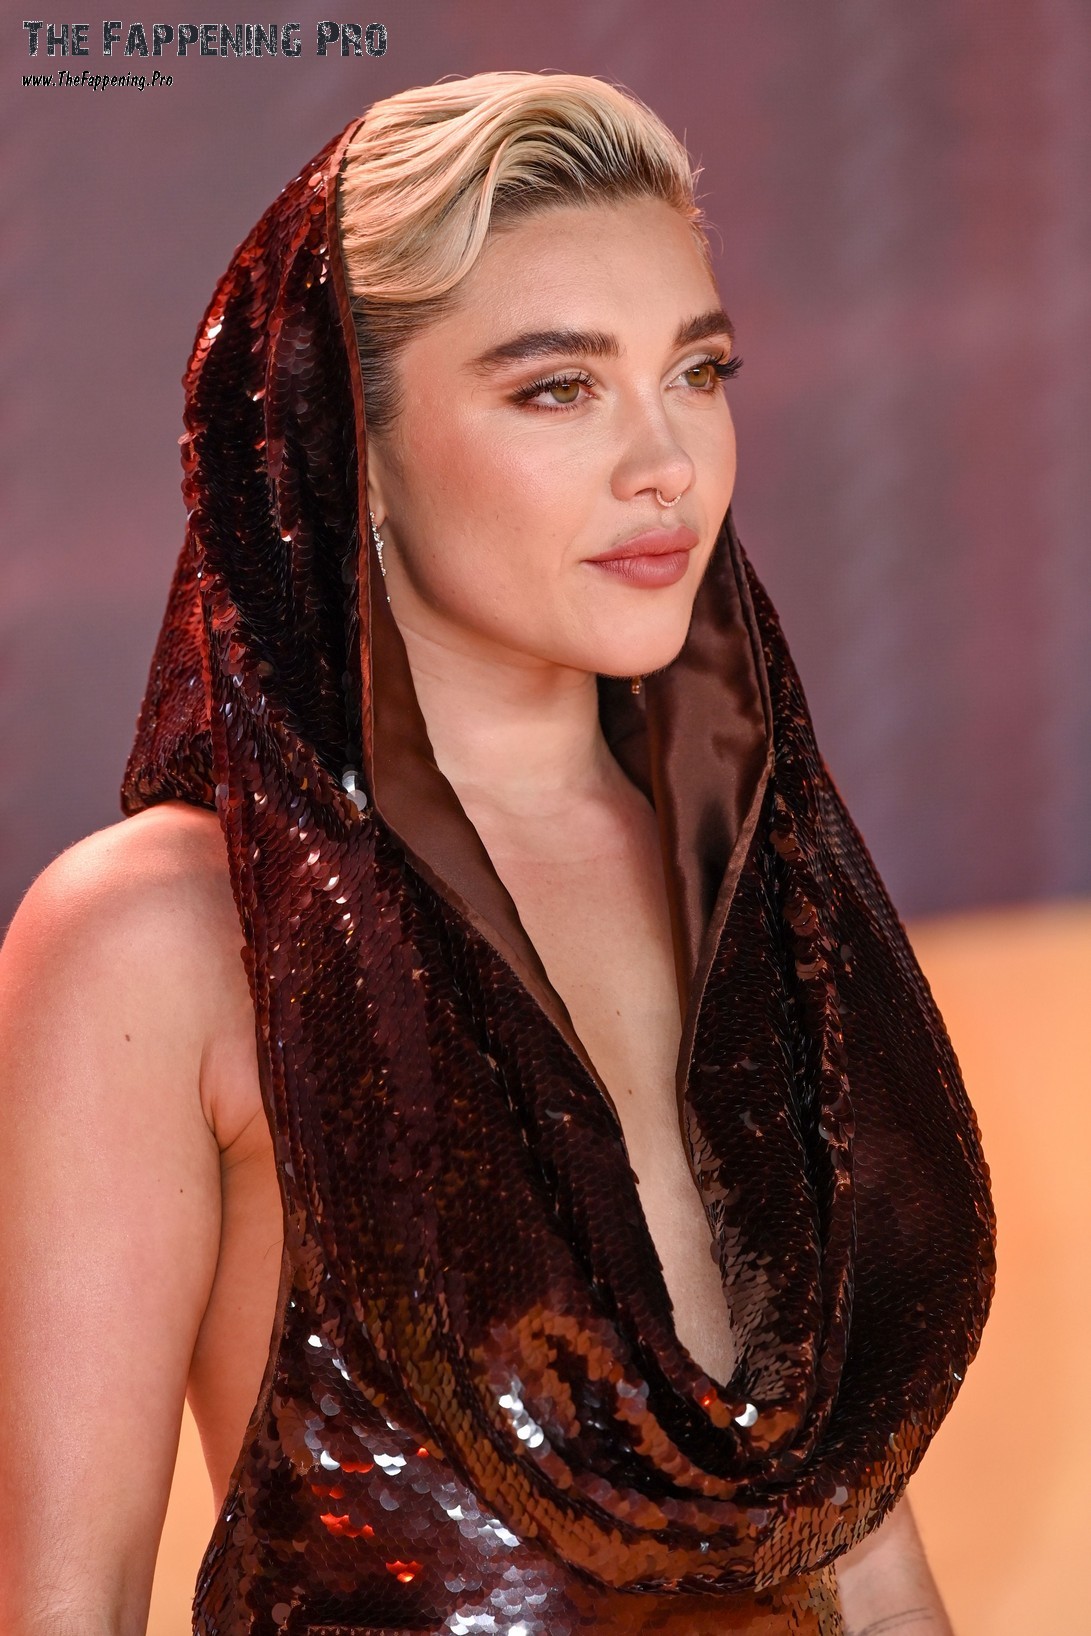 Get ready for some shocking and scandalous news from the world of Hollywood! The talented and beautiful actress Florence Pugh made jaws drop at the premiere of Dune: Part Two by flaunting her assets in a daring outfit. The 28-year-old starlet left little to the imagination in a futuristic dress that showcased her bare back and hood. But what really caught everyone's attention was Florence's bold decision to go topless, revealing her small yet sensational breasts. It seems like this British beauty isn't shy about showing off her body, as she continues to ditch the traditional bra for a more revealing look. If you're a fan of Florence Pugh, you won't want to miss out on this headline-grabbing moment!